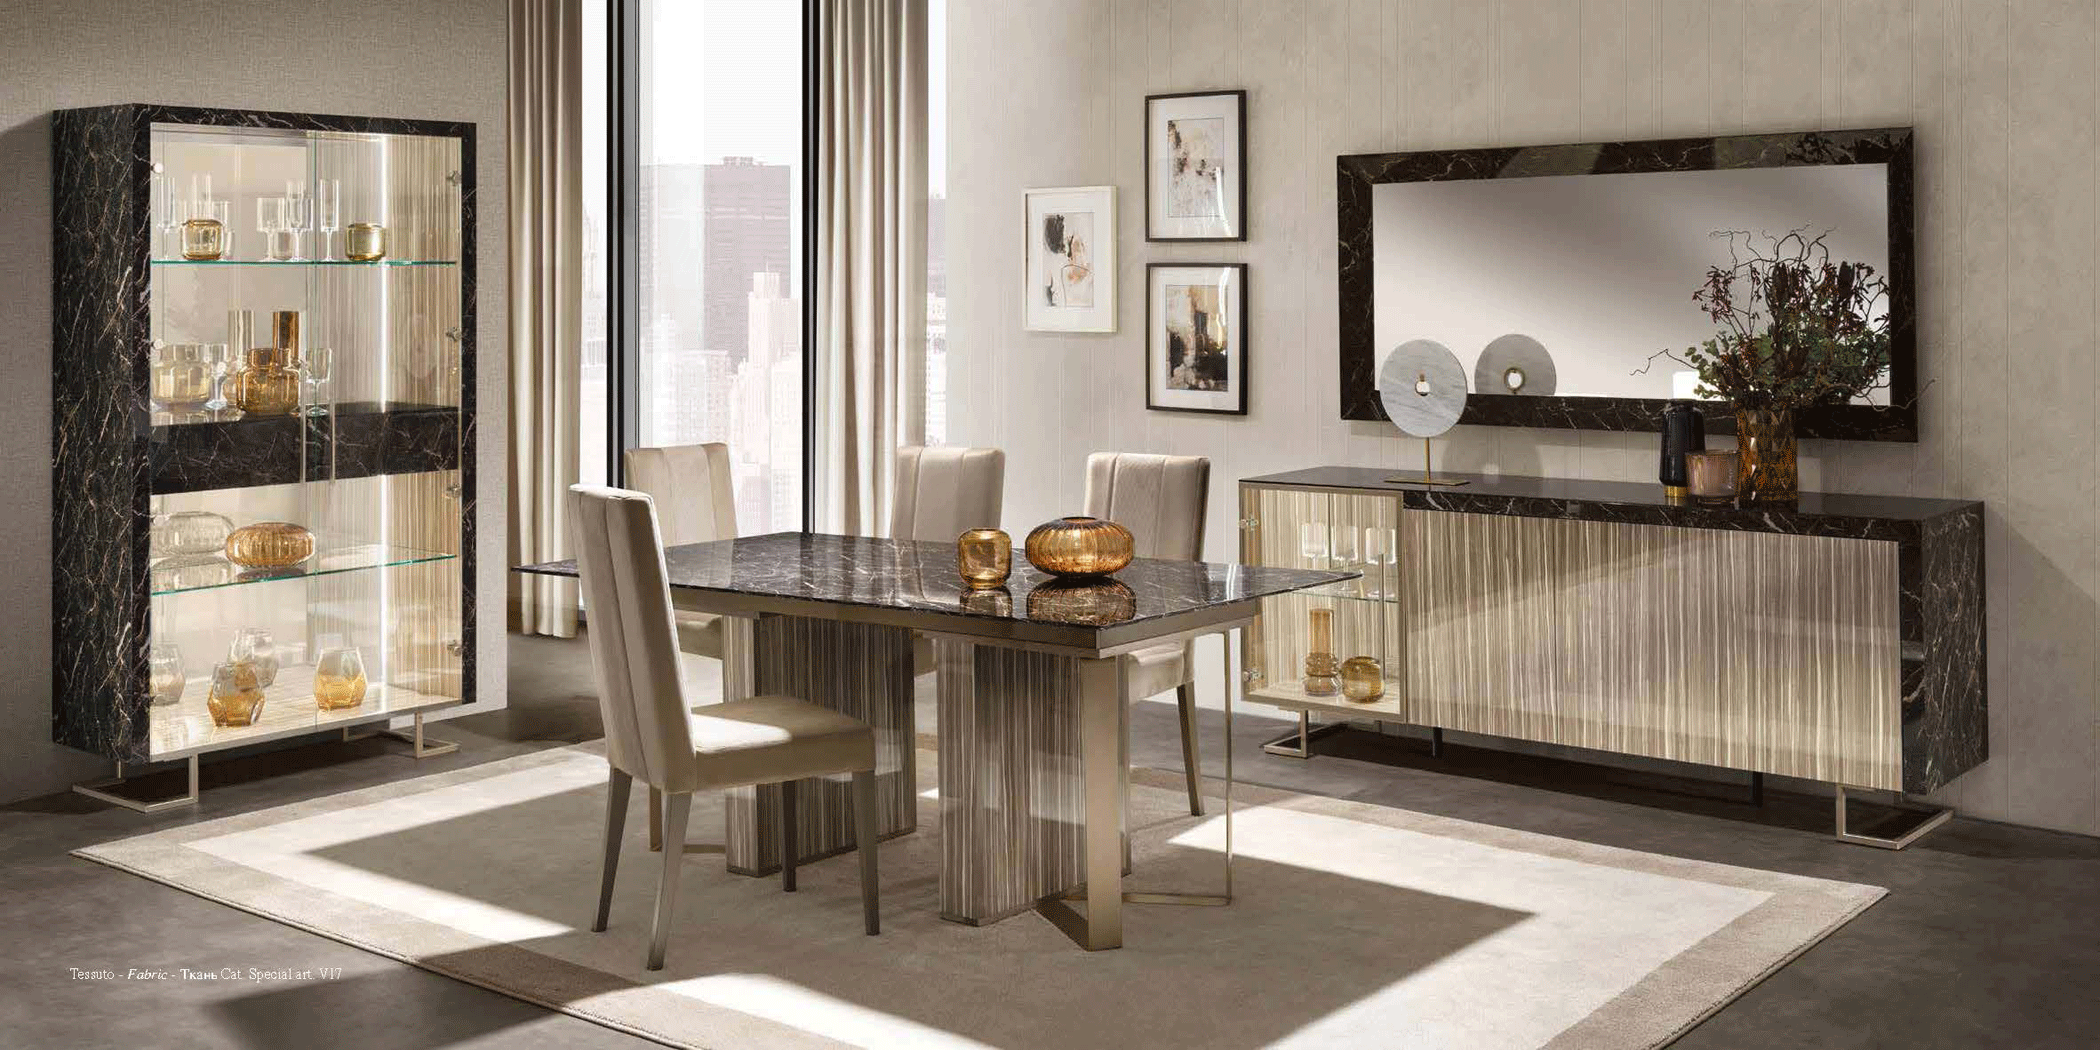 Dining Room Furniture Kitchen Tables and Chairs Sets Luce Dark Dining Room